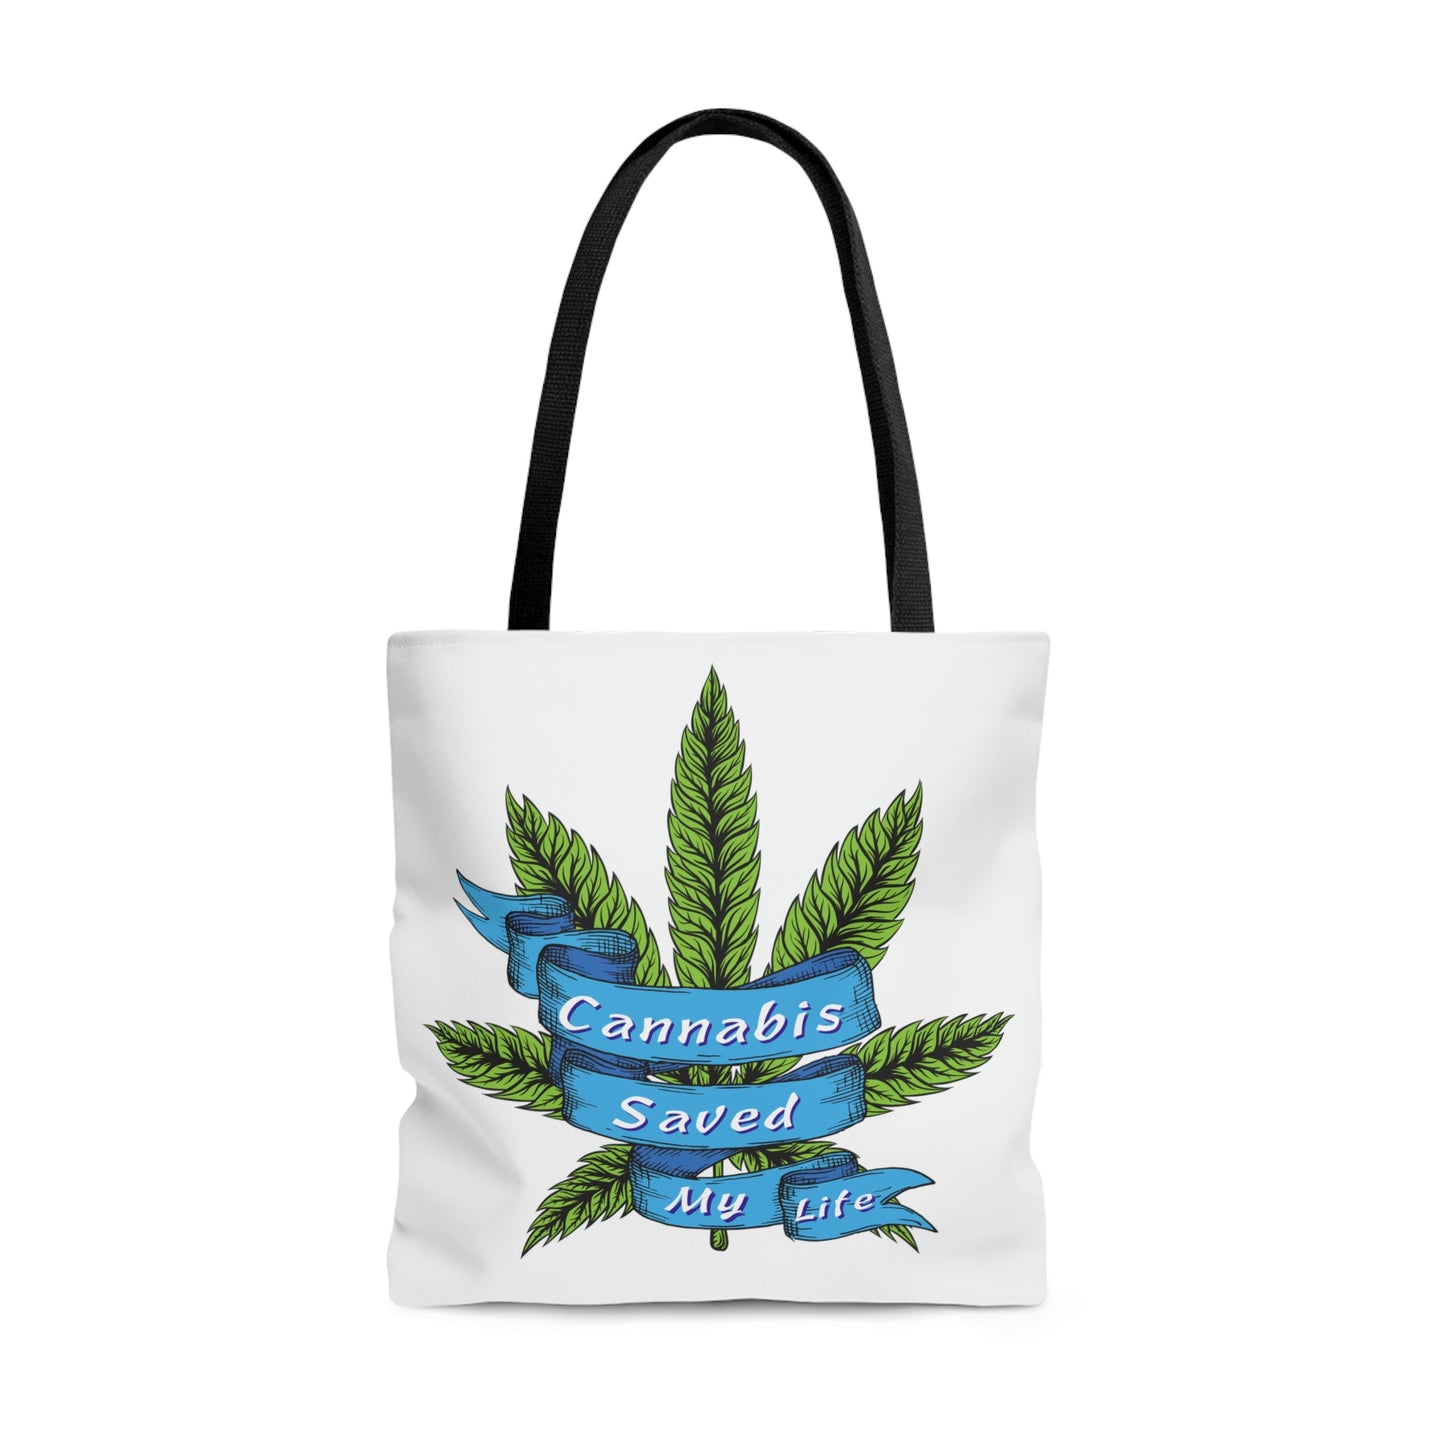 A nicely decorated Cannabis Saved My Life Tote Bag with black handle and cool bud leaf